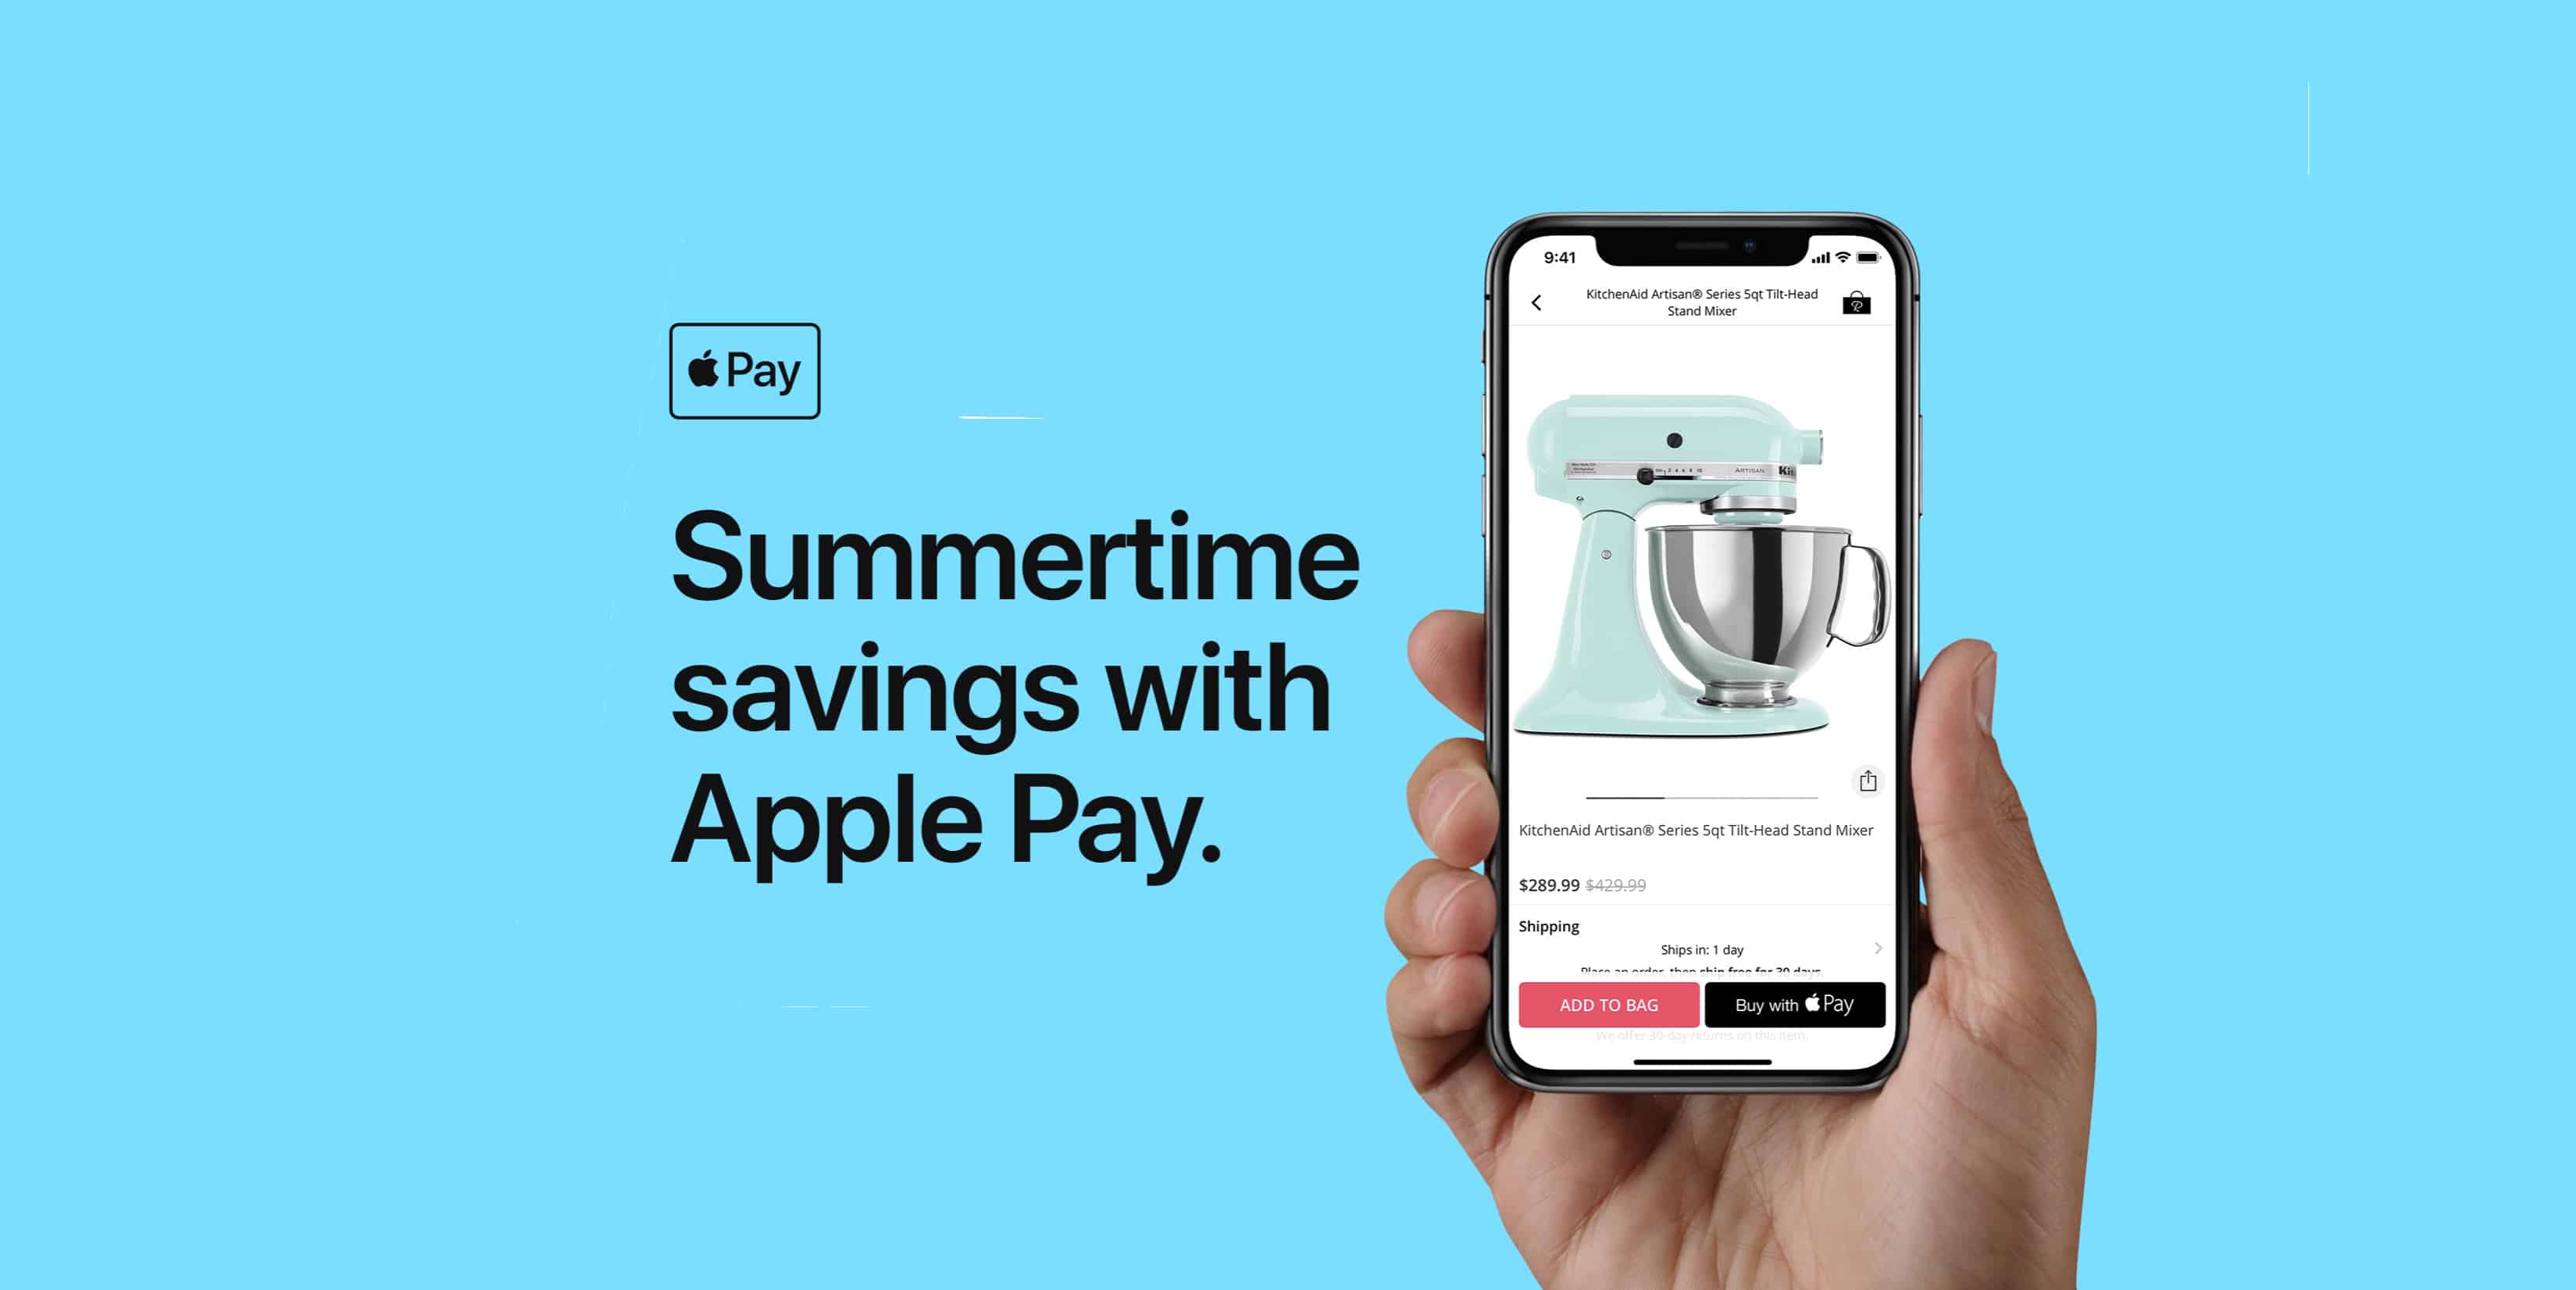 There are deals to had this summer if you just use Apple Pay.